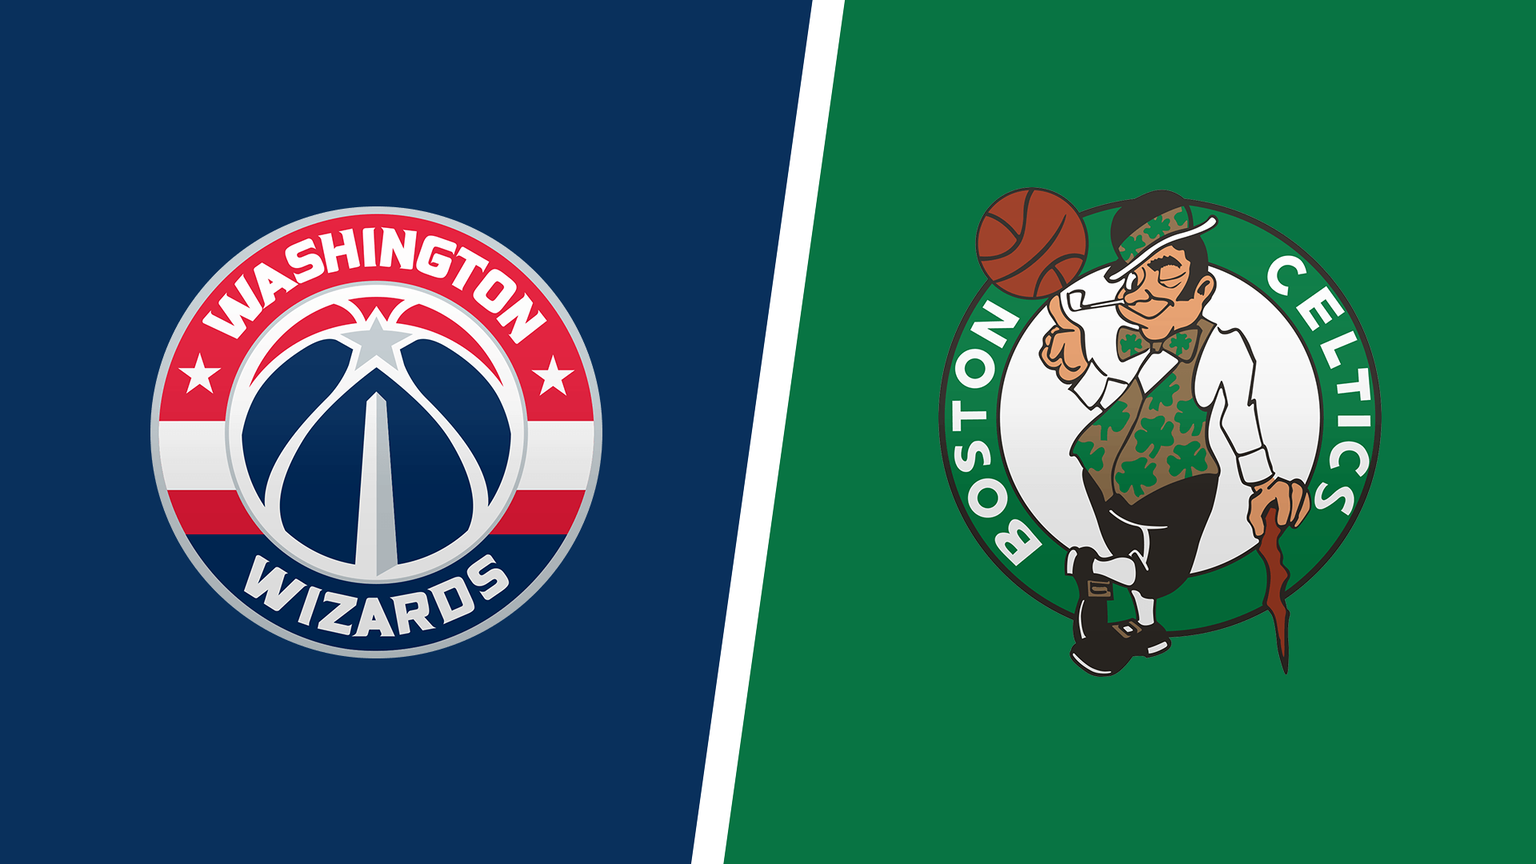 How to Watch Boston Celtics vs. Washington Wizards Game Live Online on